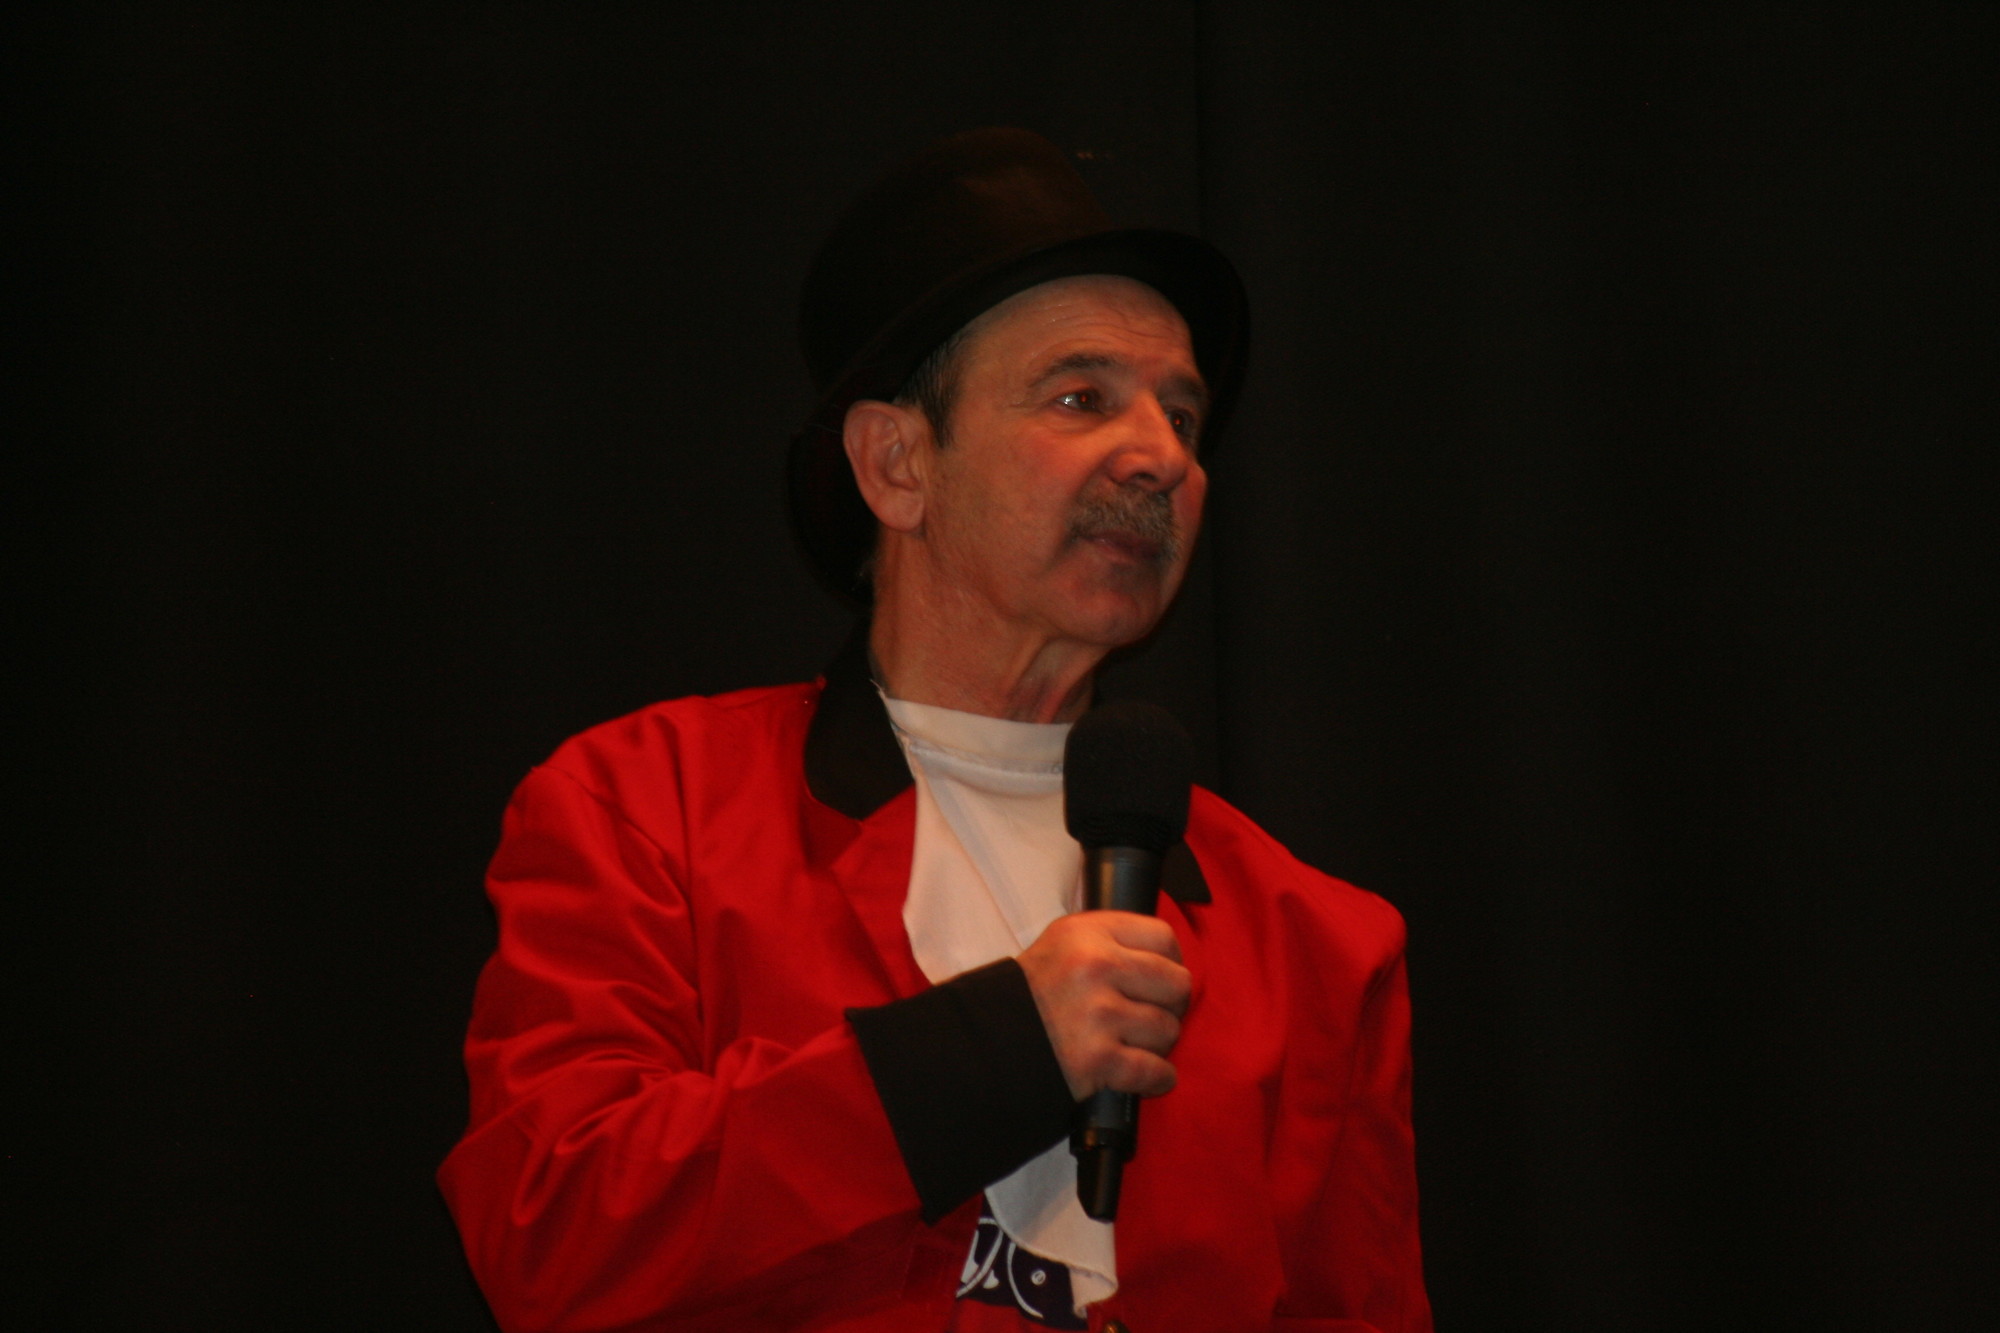 Tom Cavaliere was the Ring Leader of the event.